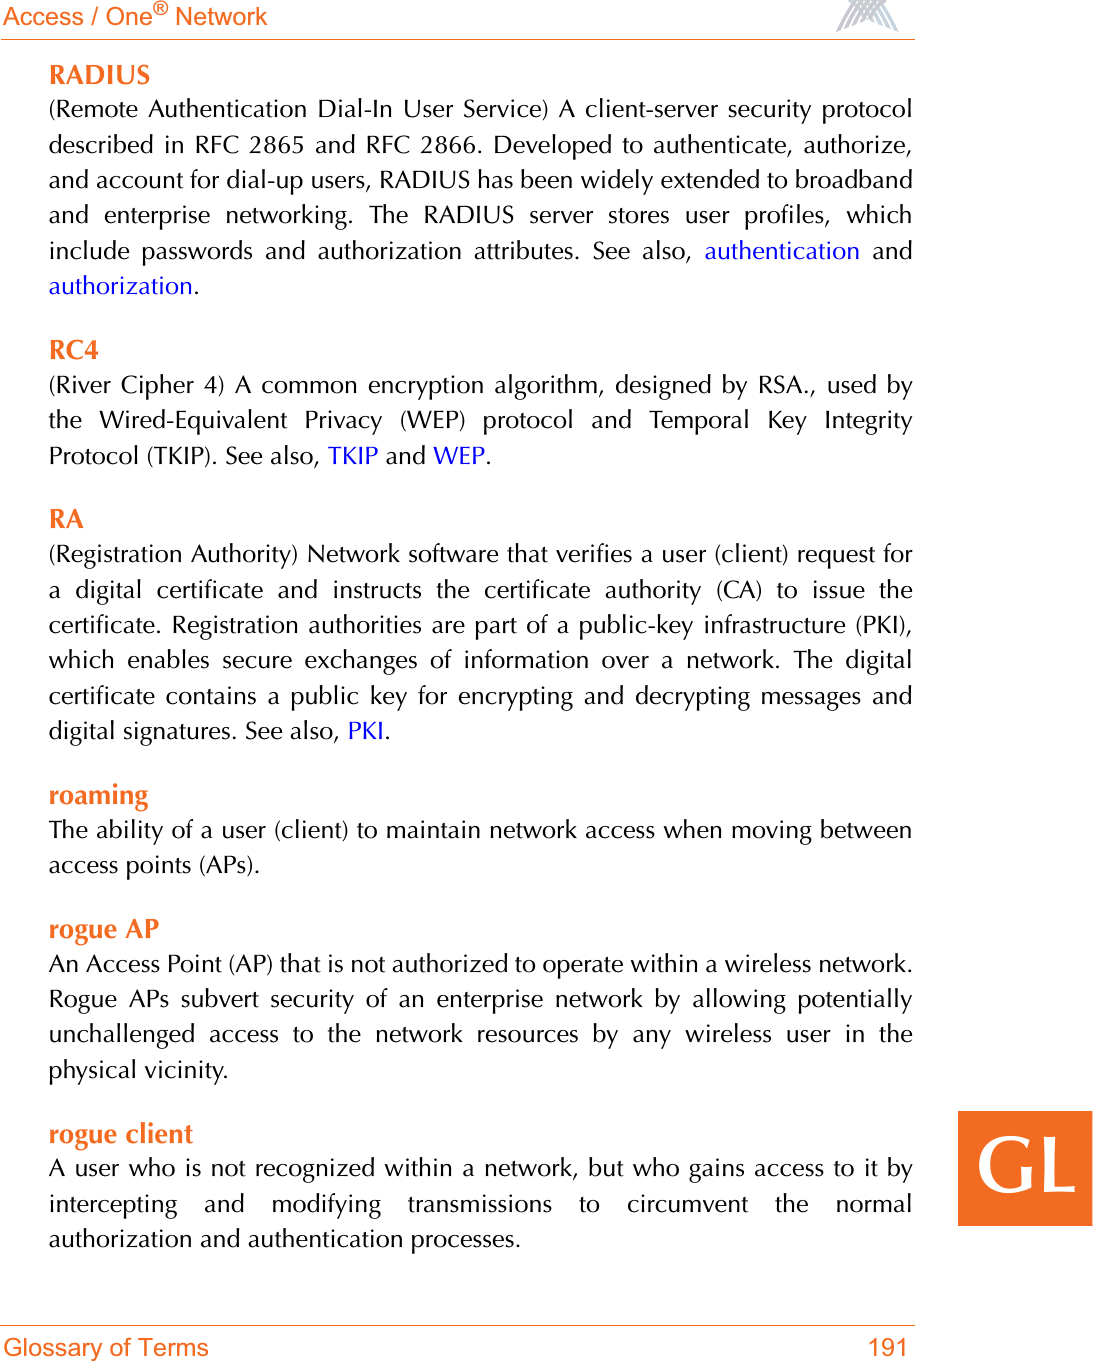 Access / One® NetworkGlossary of Terms 191GLRADIUS(Remote Authentication Dial-In User Service) A client-server security protocoldescribed in RFC 2865 and RFC 2866. Developed to authenticate, authorize,and account for dial-up users, RADIUS has been widely extended to broadbandand enterprise networking. The RADIUS server stores user profiles, whichinclude passwords and authorization attributes. See also, authentication andauthorization.RC4(River Cipher 4) A common encryption algorithm, designed by RSA., used bythe Wired-Equivalent Privacy (WEP) protocol and Temporal Key IntegrityProtocol (TKIP). See also, TKIP and WEP.RA(Registration Authority) Network software that verifies a user (client) request fora digital certificate and instructs the certificate authority (CA) to issue thecertificate. Registration authorities are part of a public-key infrastructure (PKI),which enables secure exchanges of information over a network. The digitalcertificate contains a public key for encrypting and decrypting messages anddigital signatures. See also, PKI.roamingThe ability of a user (client) to maintain network access when moving betweenaccess points (APs).rogue APAn Access Point (AP) that is not authorized to operate within a wireless network.Rogue APs subvert security of an enterprise network by allowing potentiallyunchallenged access to the network resources by any wireless user in thephysical vicinity.rogue clientA user who is not recognized within a network, but who gains access to it byintercepting and modifying transmissions to circumvent the normalauthorization and authentication processes.